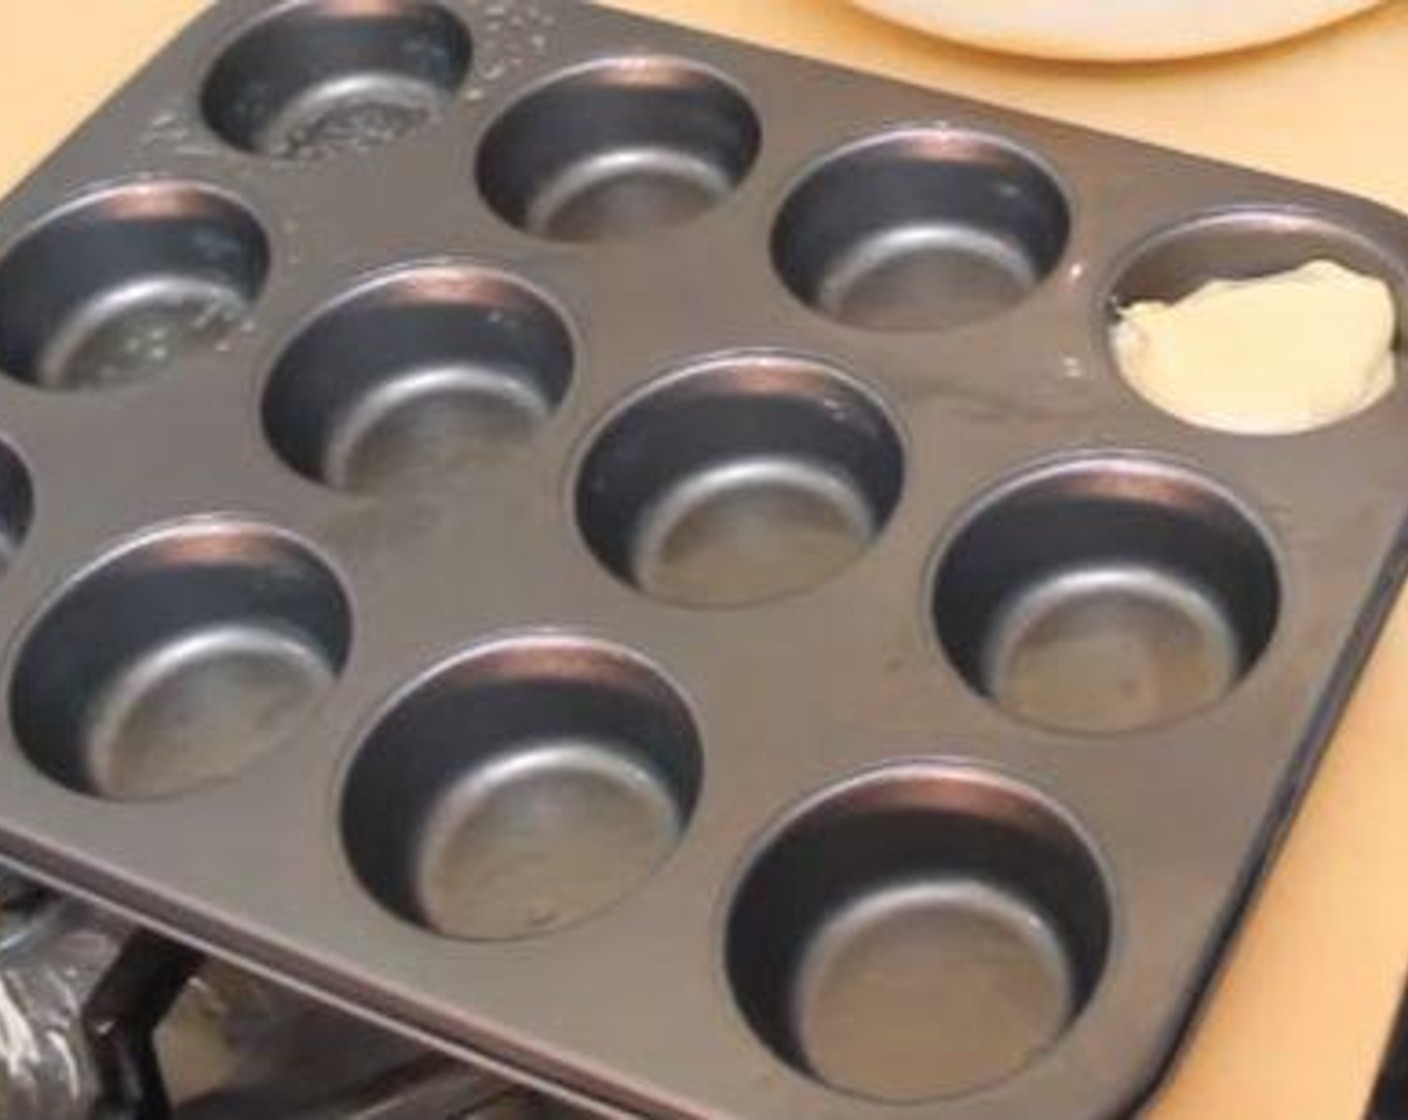 step 3 Stir in the Milk (1/2 cup) and pour the batter 3/4 high into the cups of a greased muffin tin. Bake the cupcakes at 350 degrees F (180 degrees C) for 18-20 minutes or until a toothpick inserted in the center comes out clean.